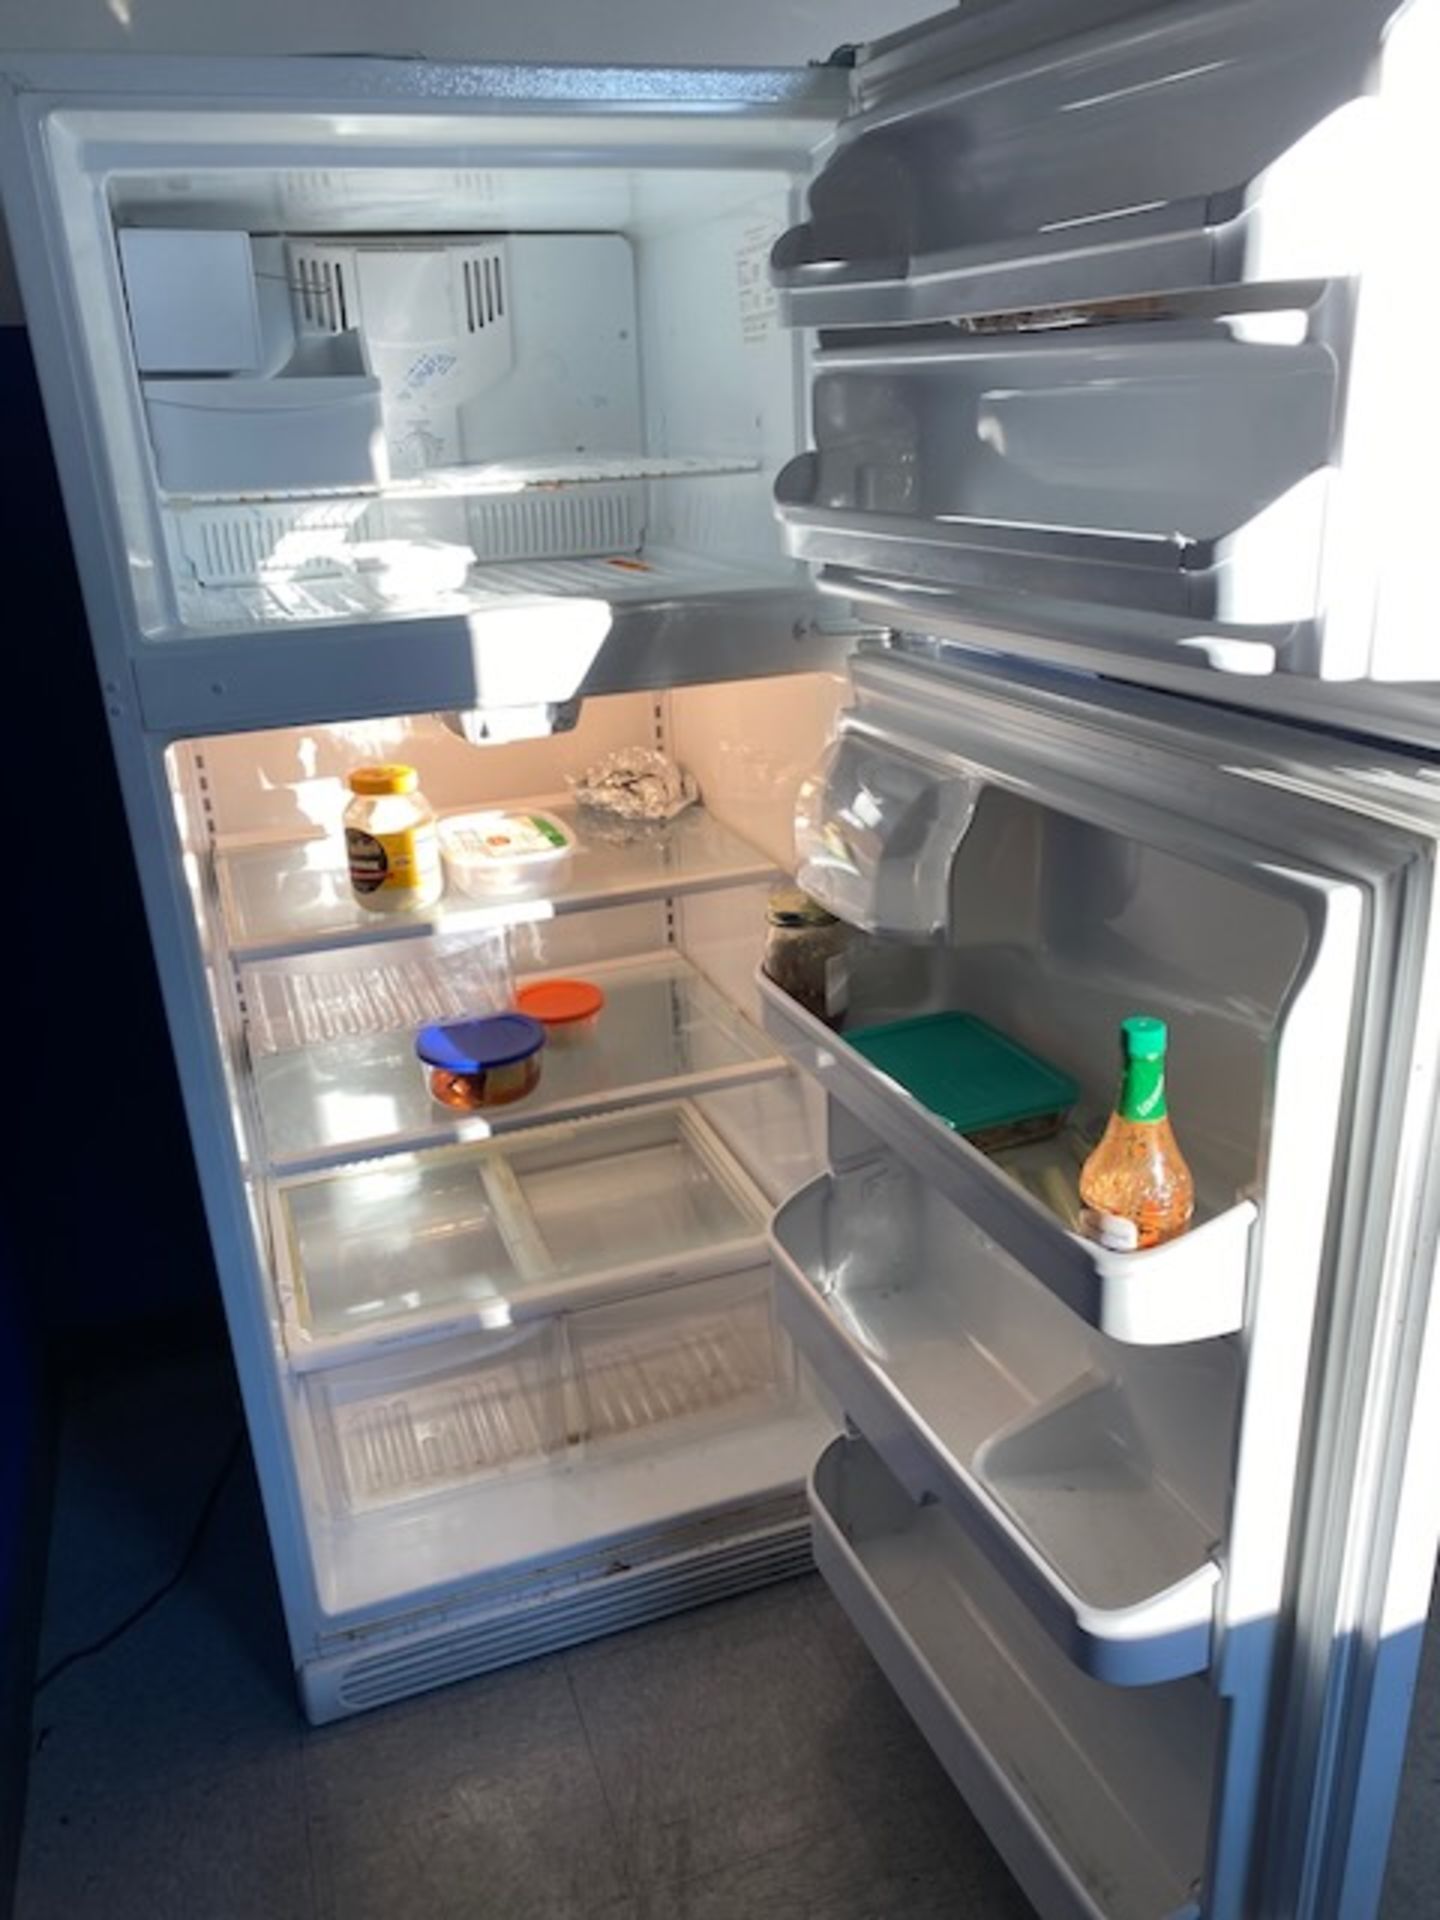 FRIGIDAIRE Refrigerator W/ ice maker ( located downstairs ) - Image 2 of 2